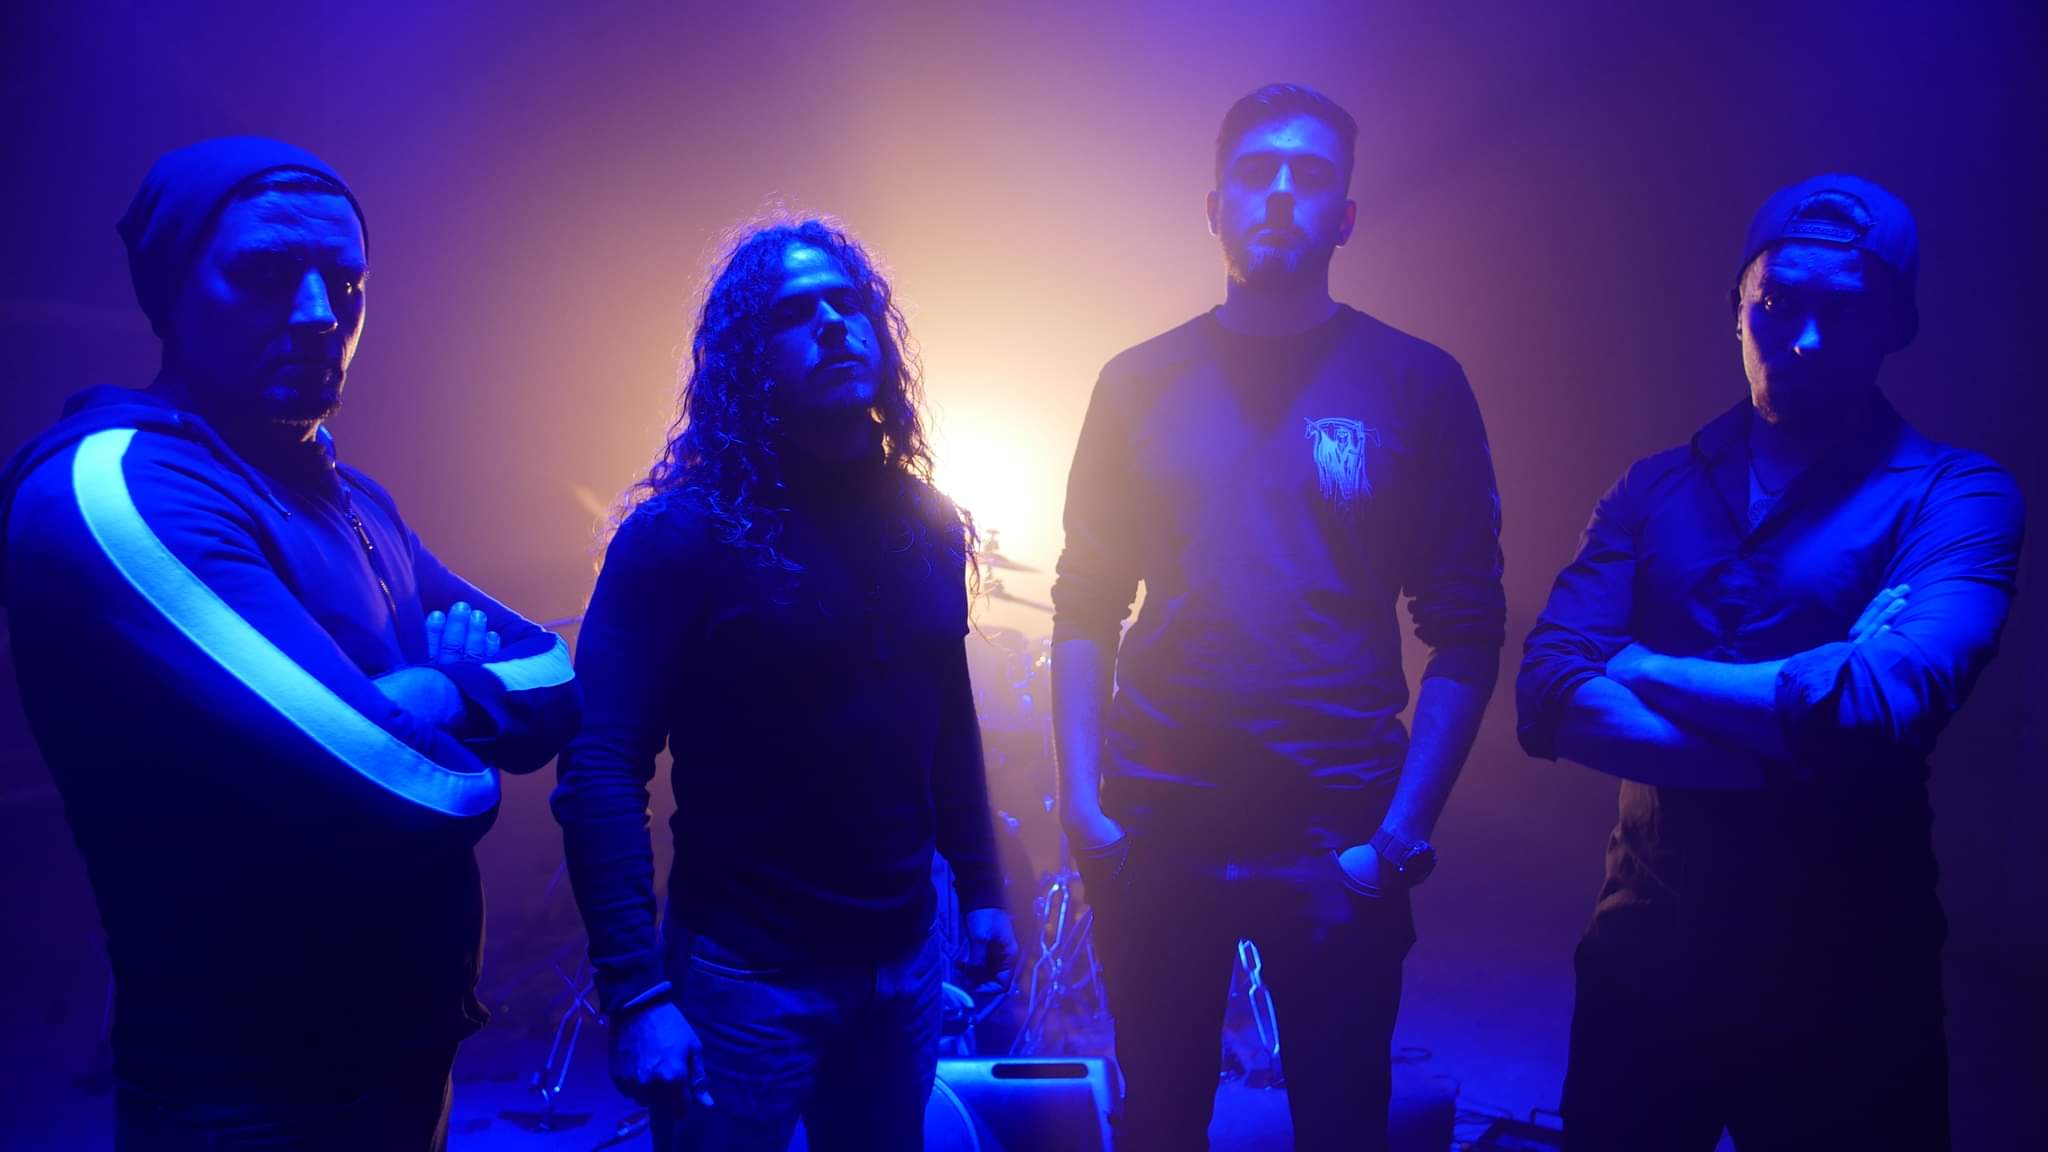 MAGNETIC: Neues Video zu “Darkness and Shadows” in Arbeit